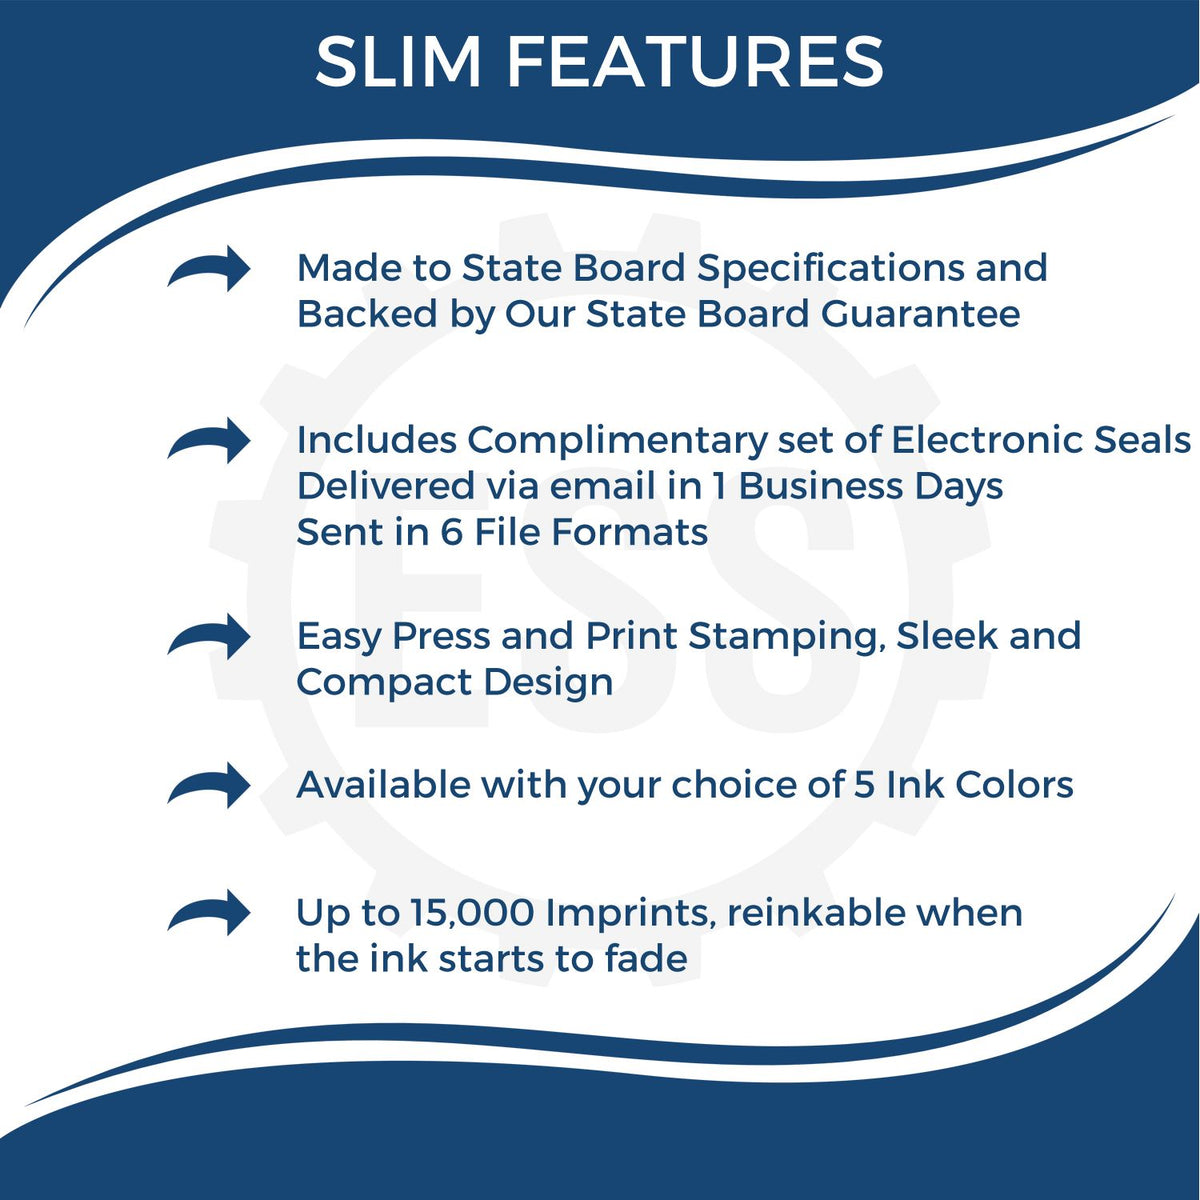 A picture of an infographic highlighting the selling points for the Slim Pre-Inked Colorado Land Surveyor Seal Stamp